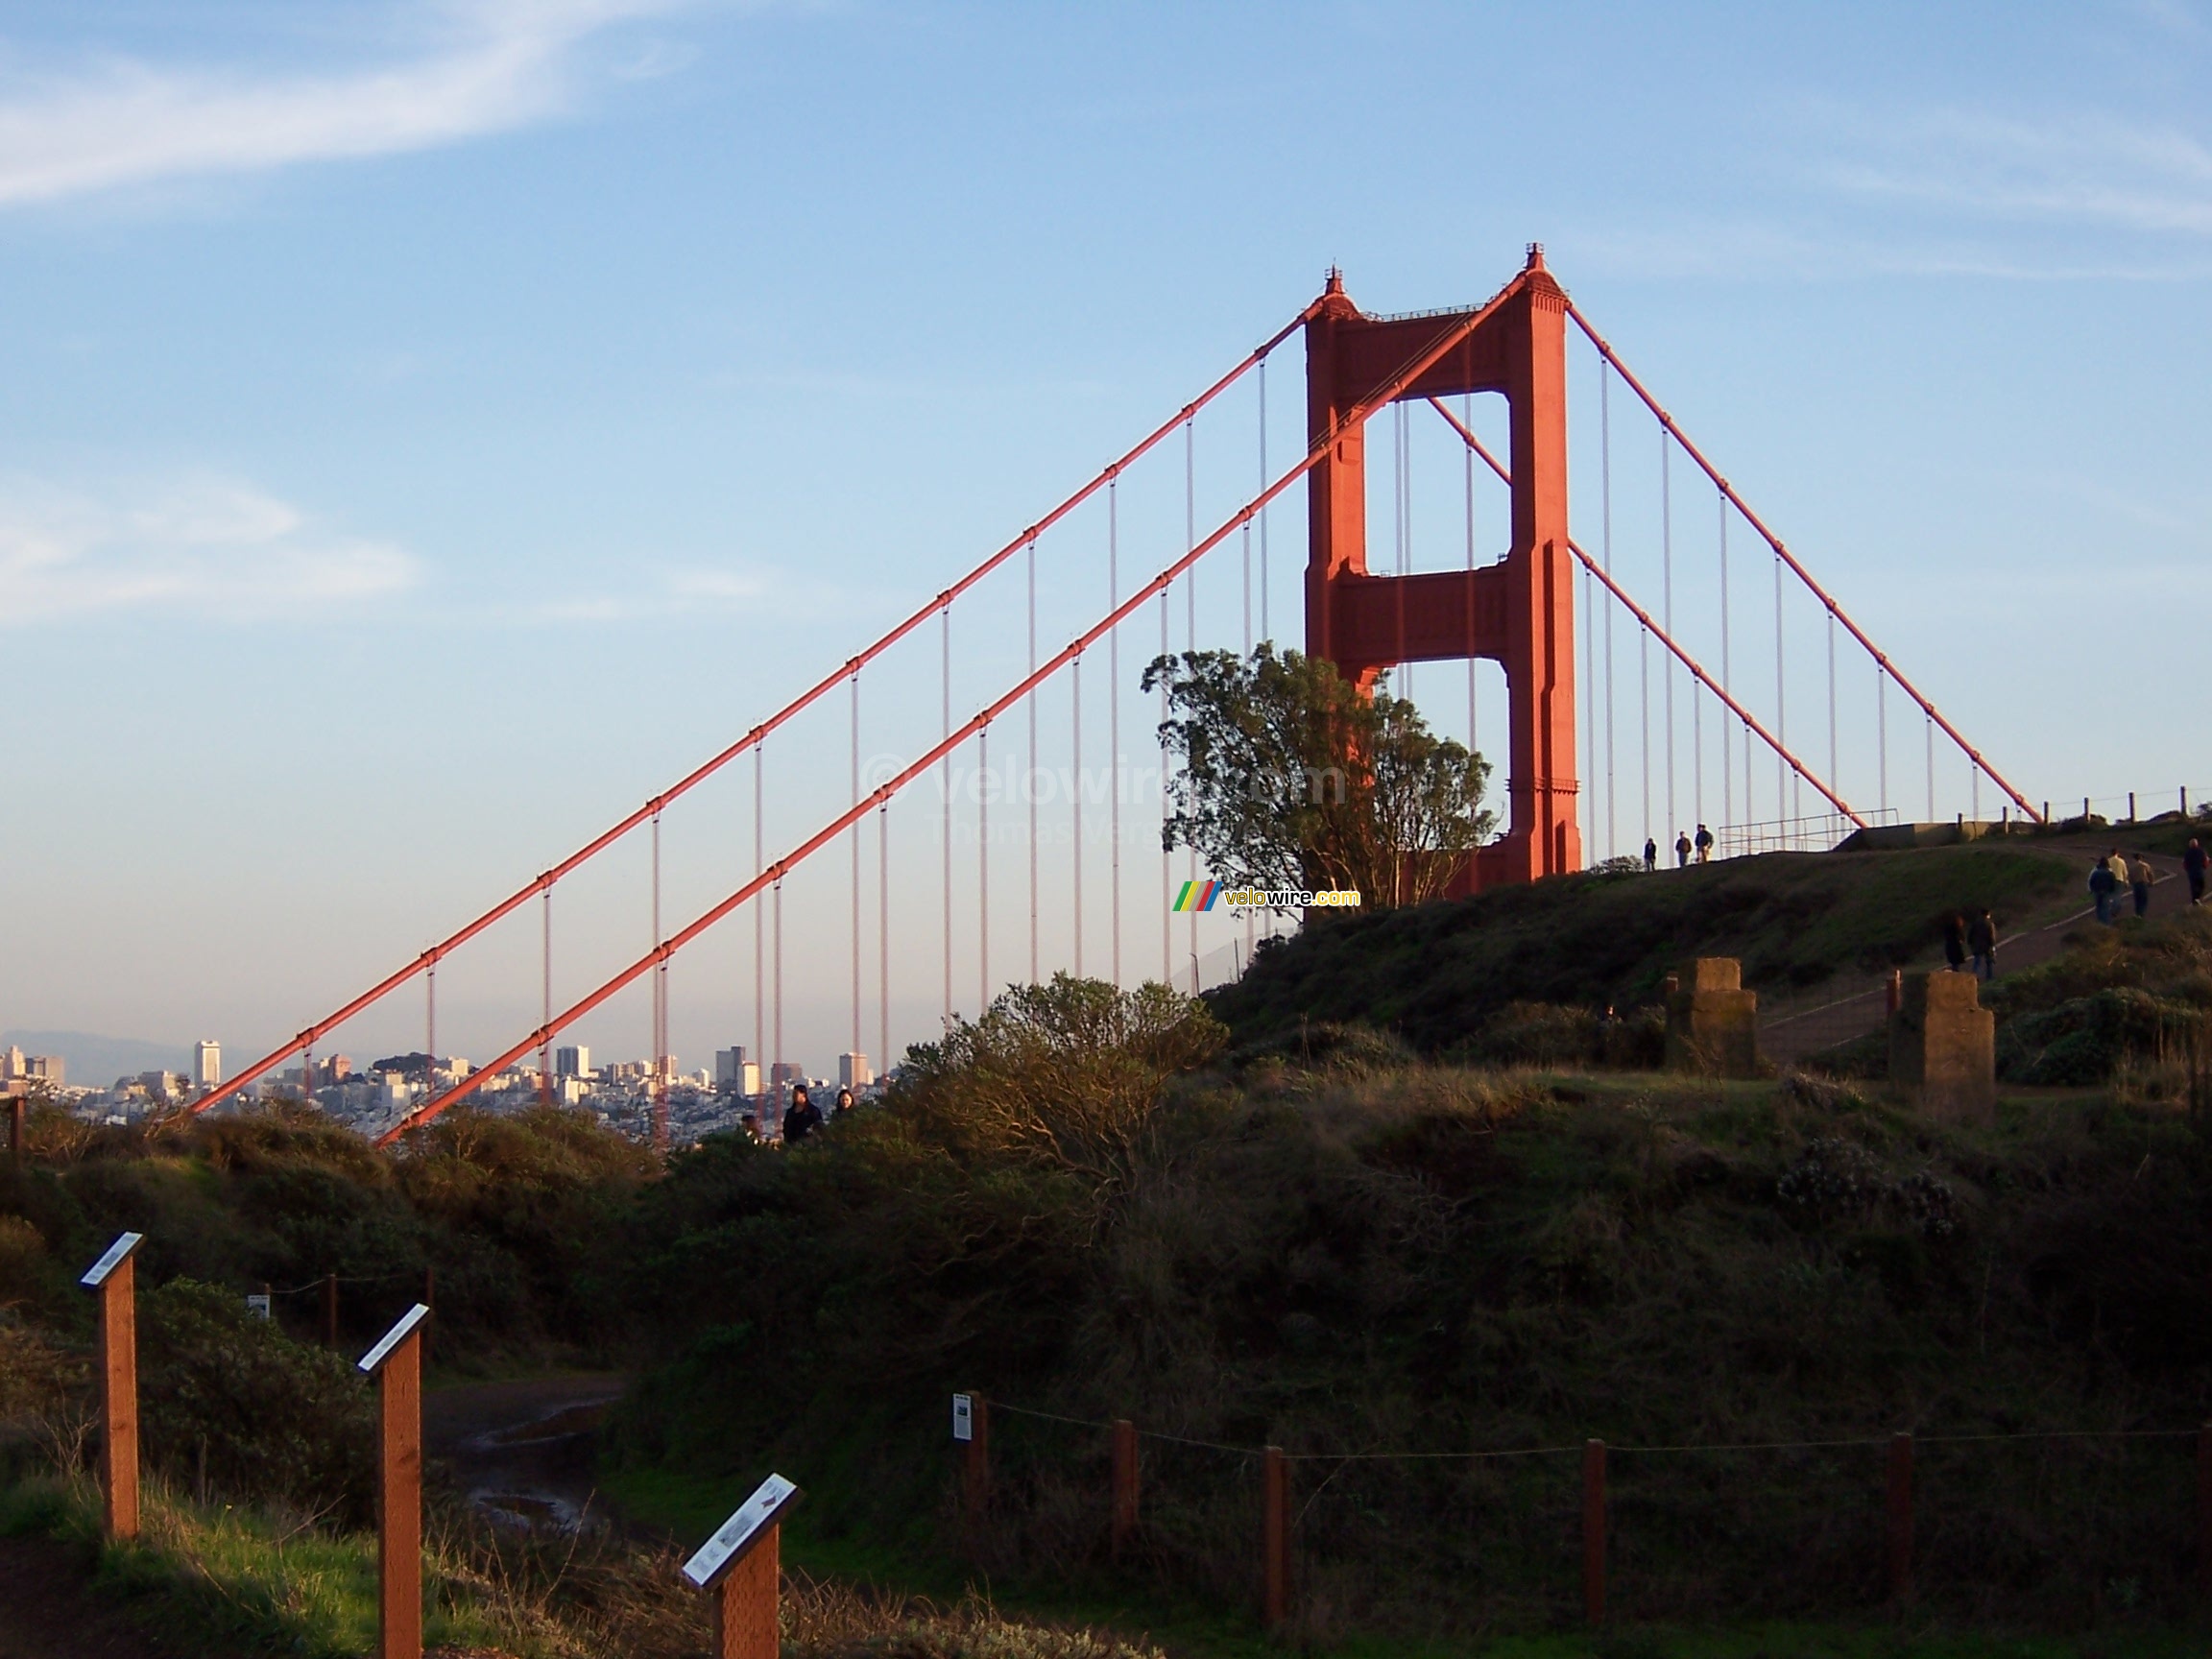 The Golden Gate Bridge and the visitor's park